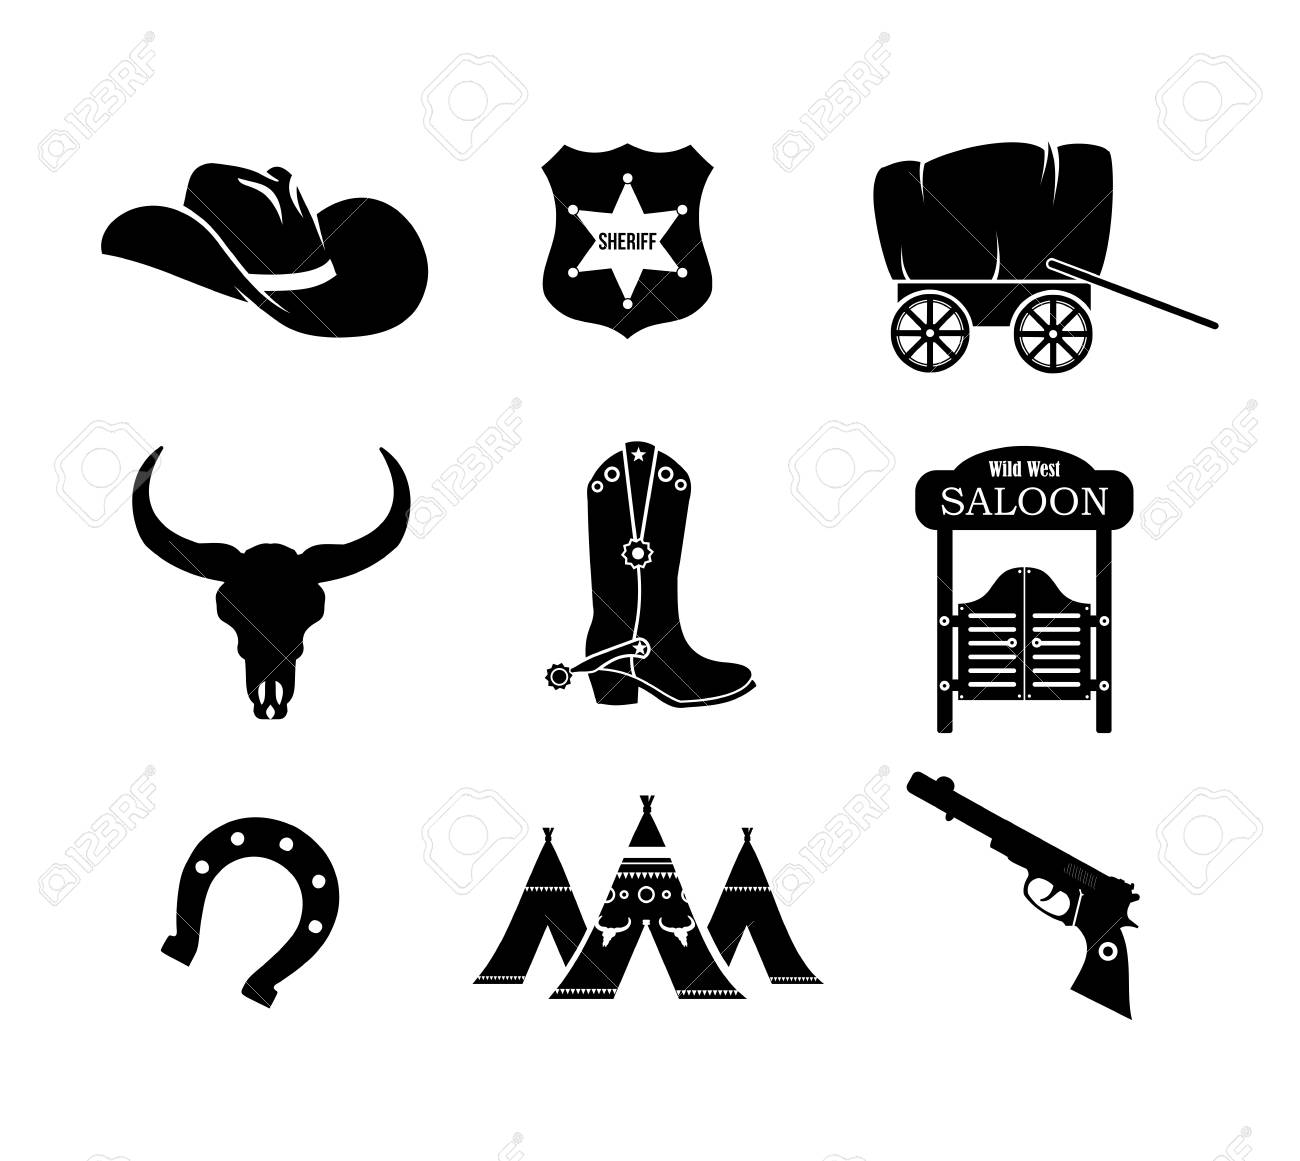 Download Western Clip Art Vector at Vectorified.com | Collection of ...